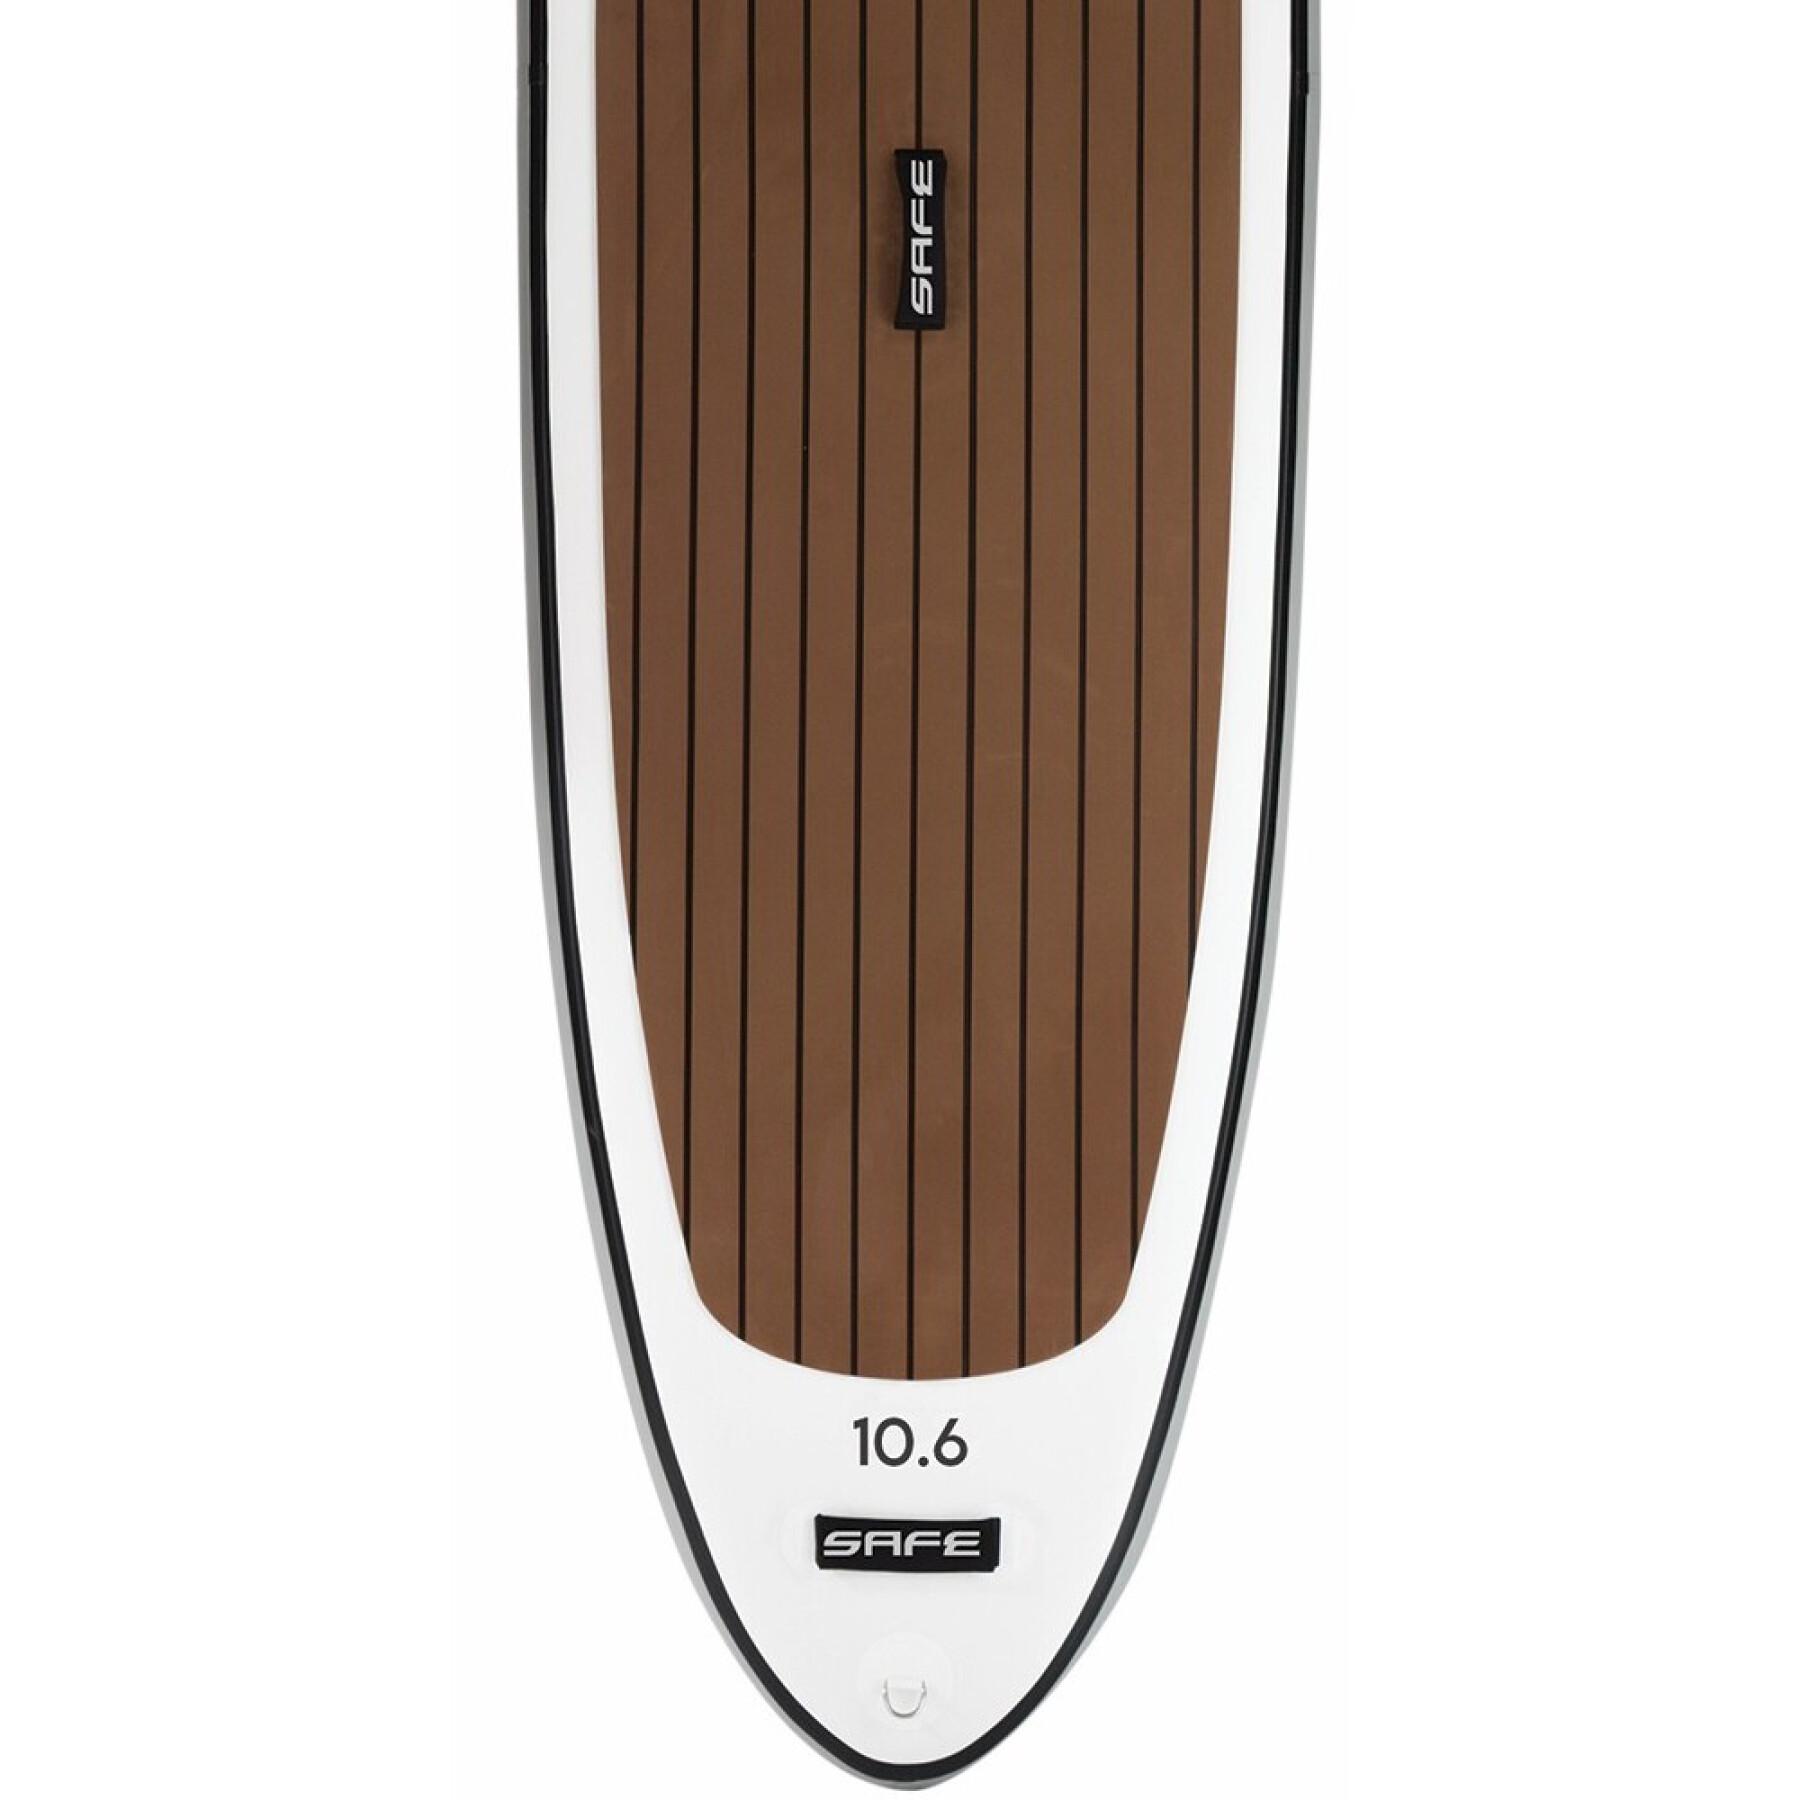 Stand up gonfiabile Safe Waterman Nautic All round – 10’6